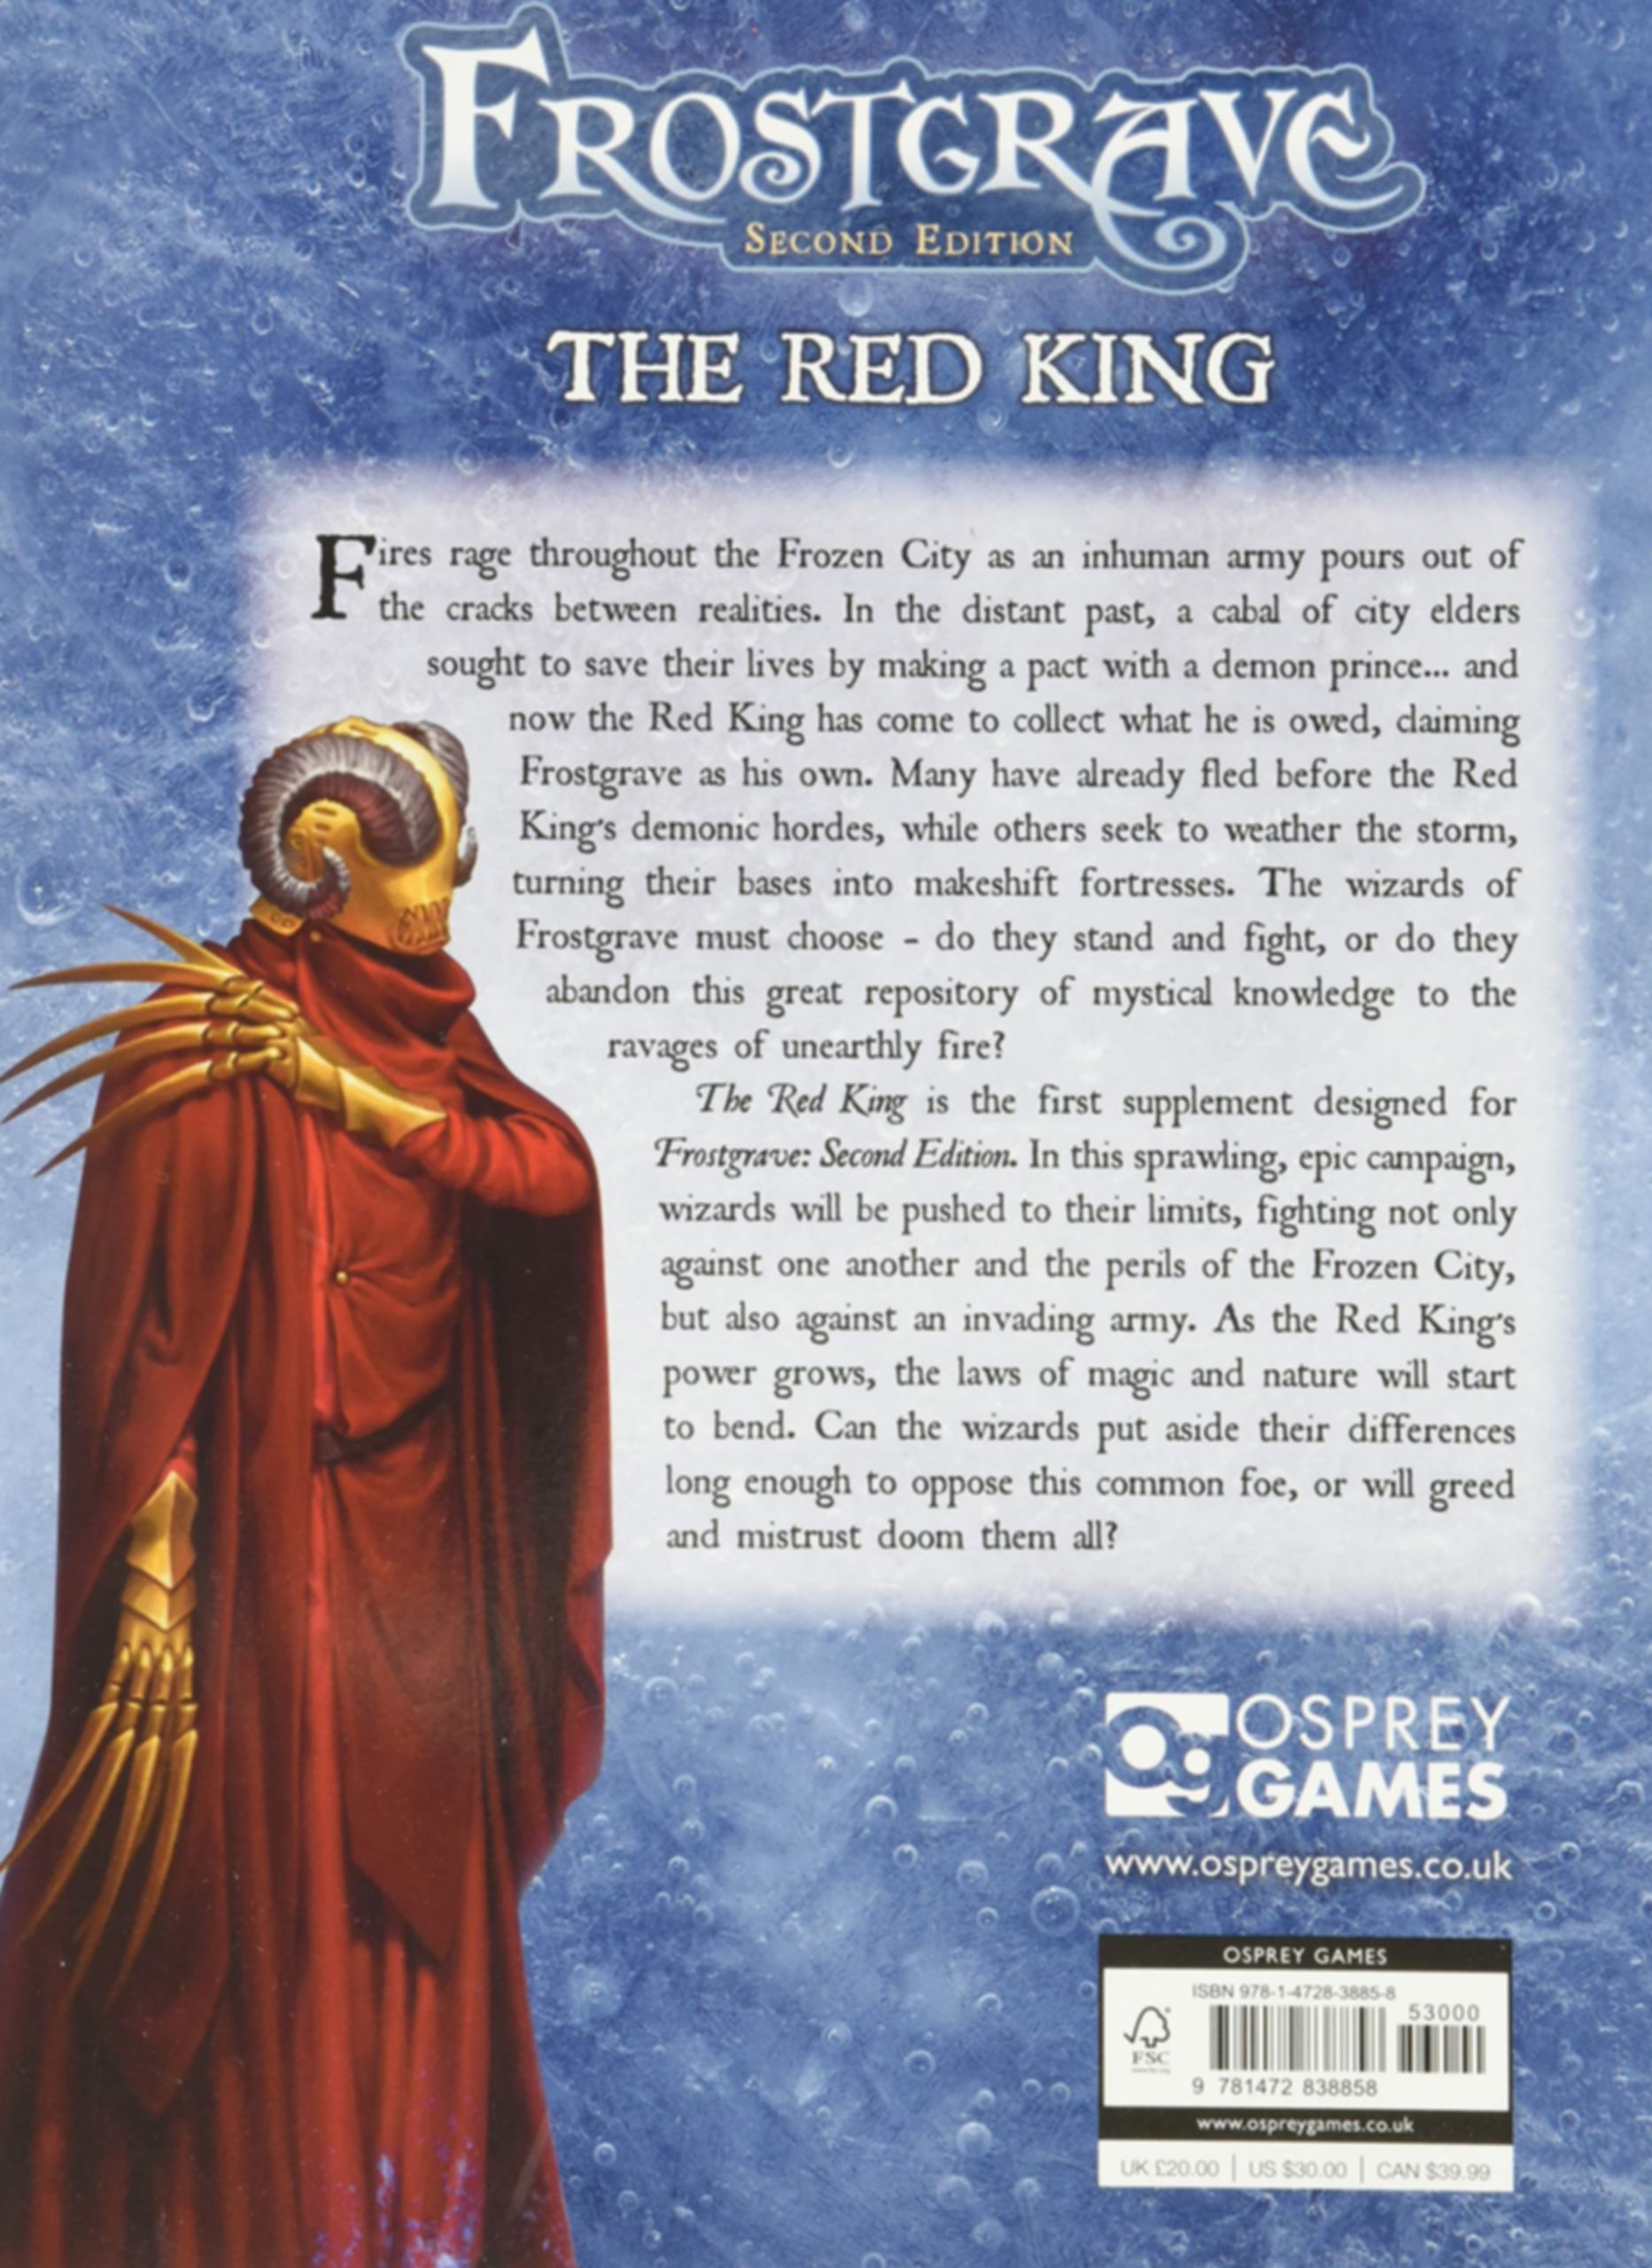 Frostgrave: Second Edition – The Red King rückseite der box